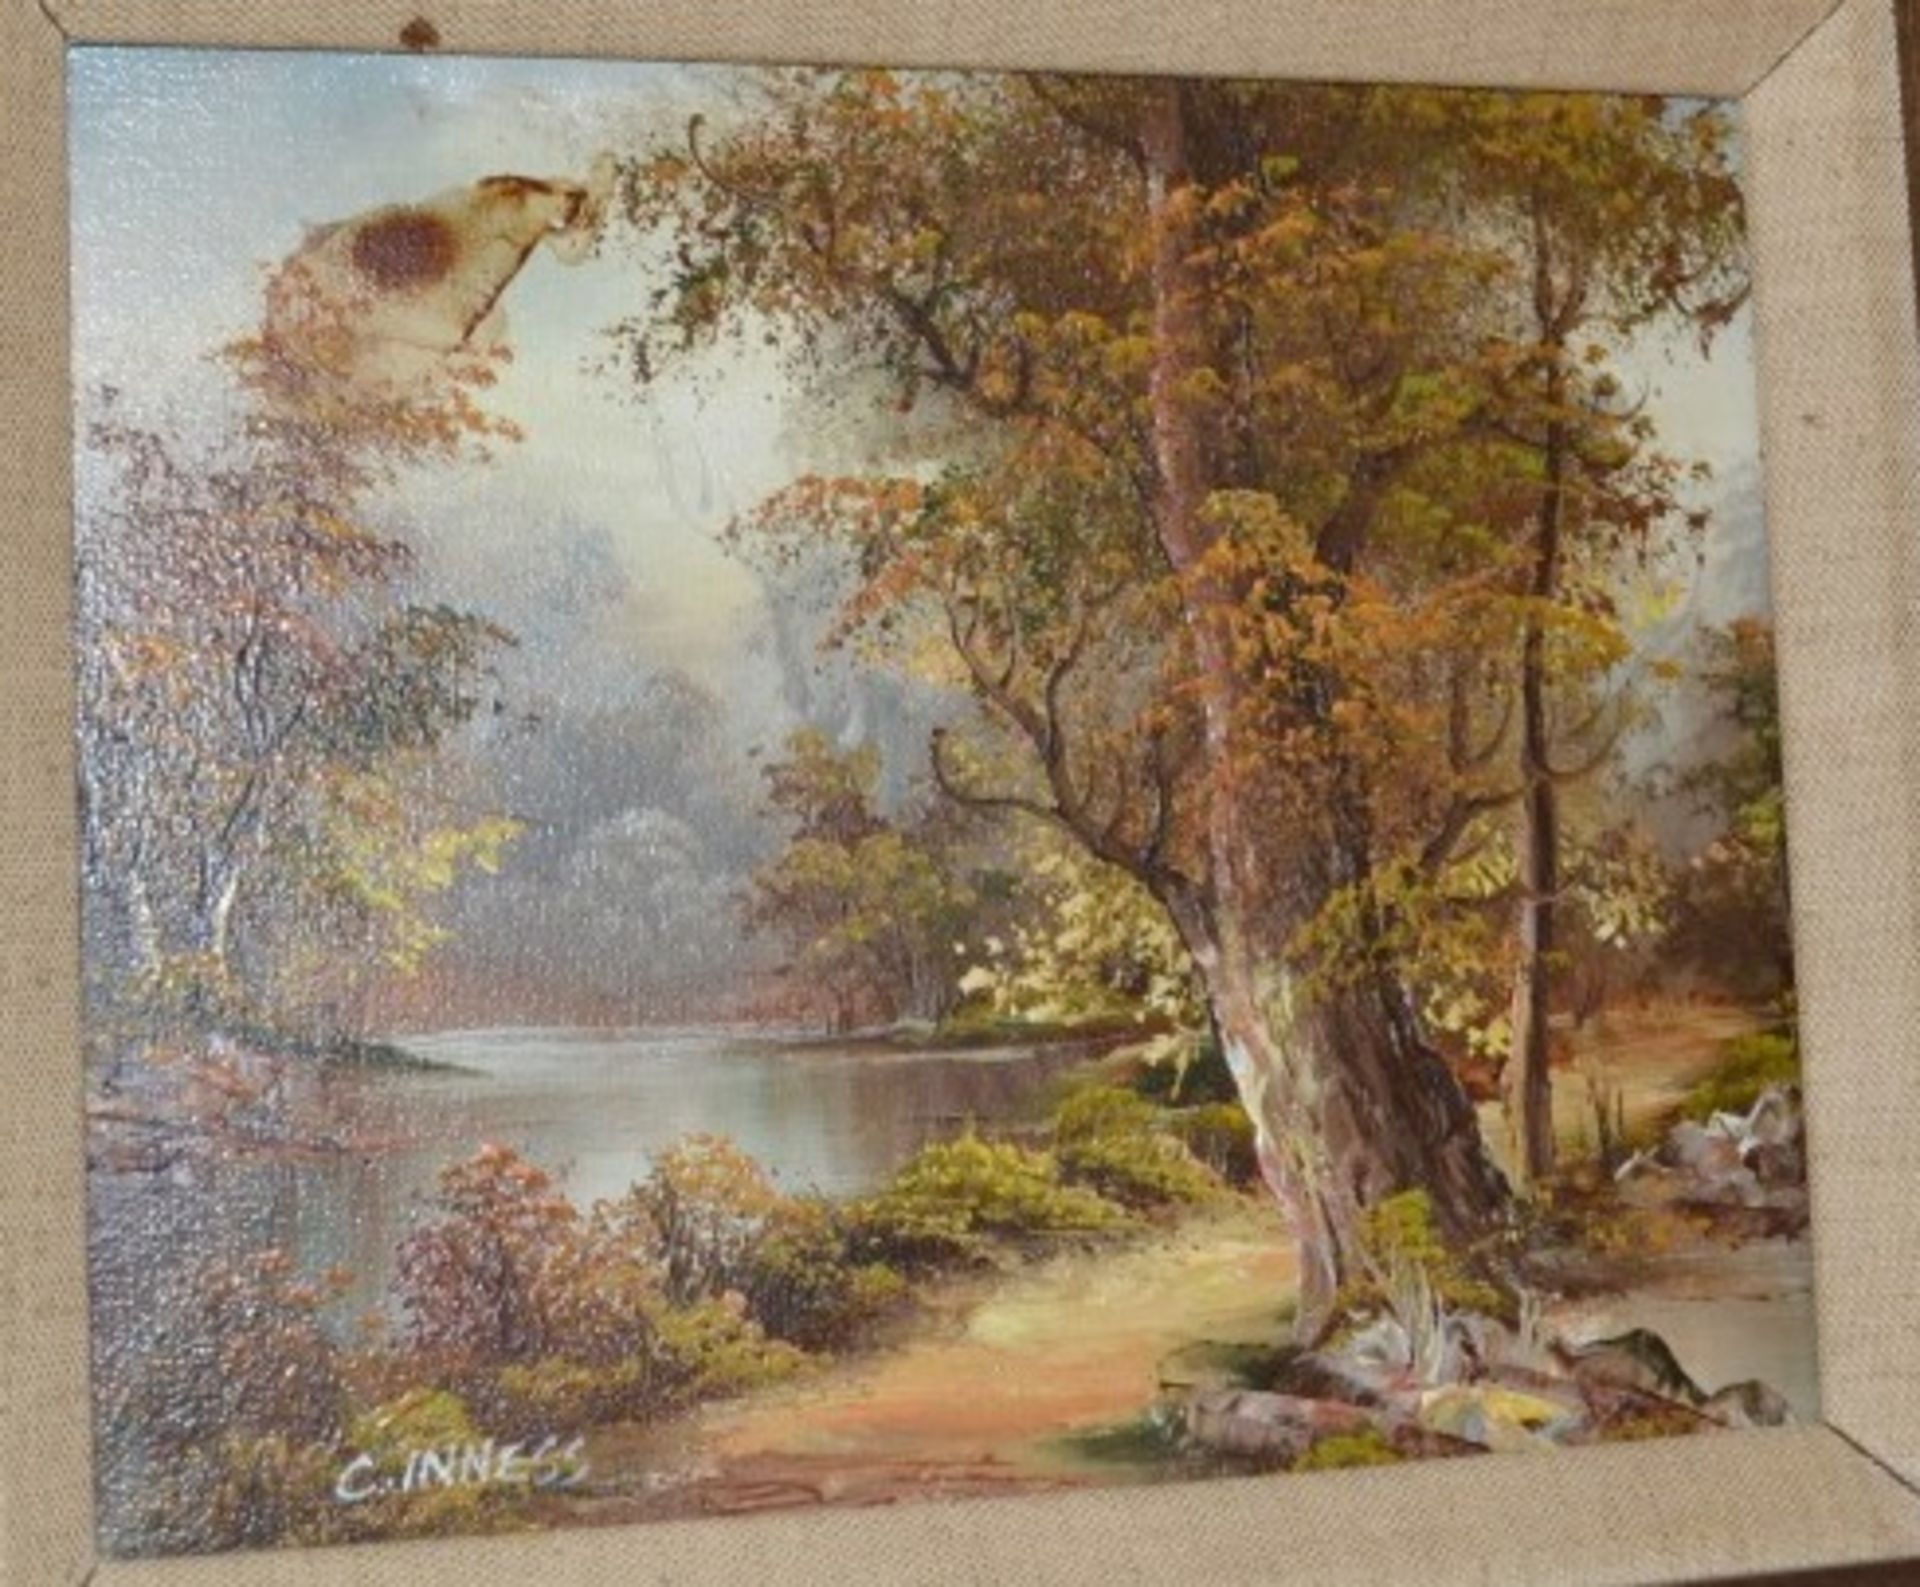 1 x Vintage Framed Oil Painting Of Woodland Scene With Lake - Signed C. Inness (Clara Inness) - - Image 4 of 4